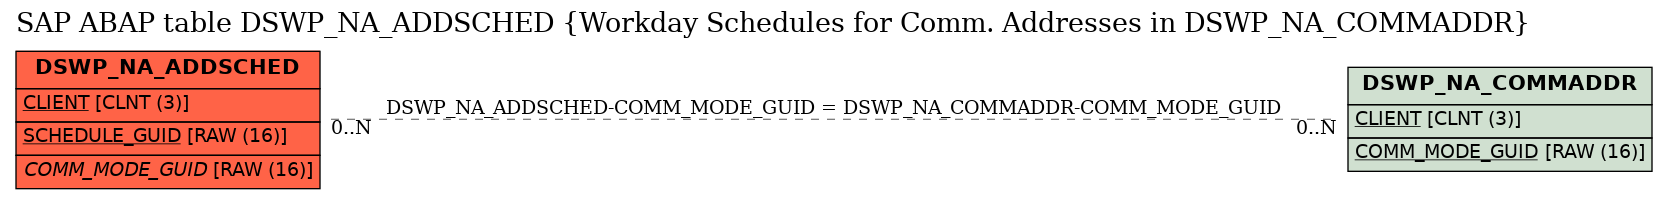 E-R Diagram for table DSWP_NA_ADDSCHED (Workday Schedules for Comm. Addresses in DSWP_NA_COMMADDR)